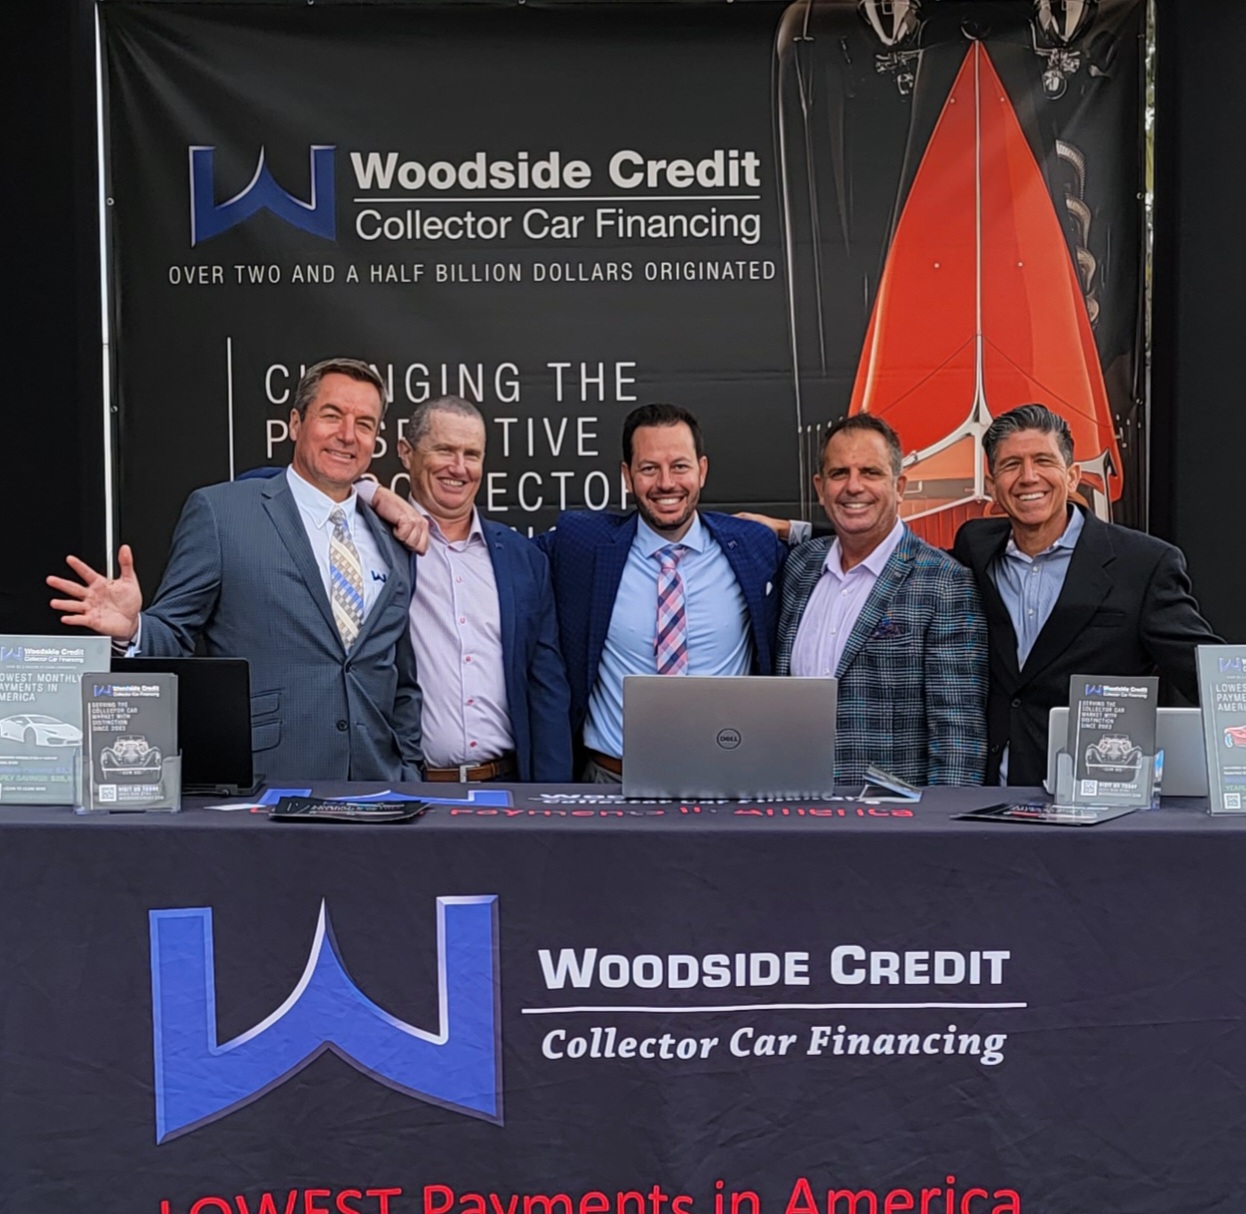 Woodside Credit Booth at Pebble Beach